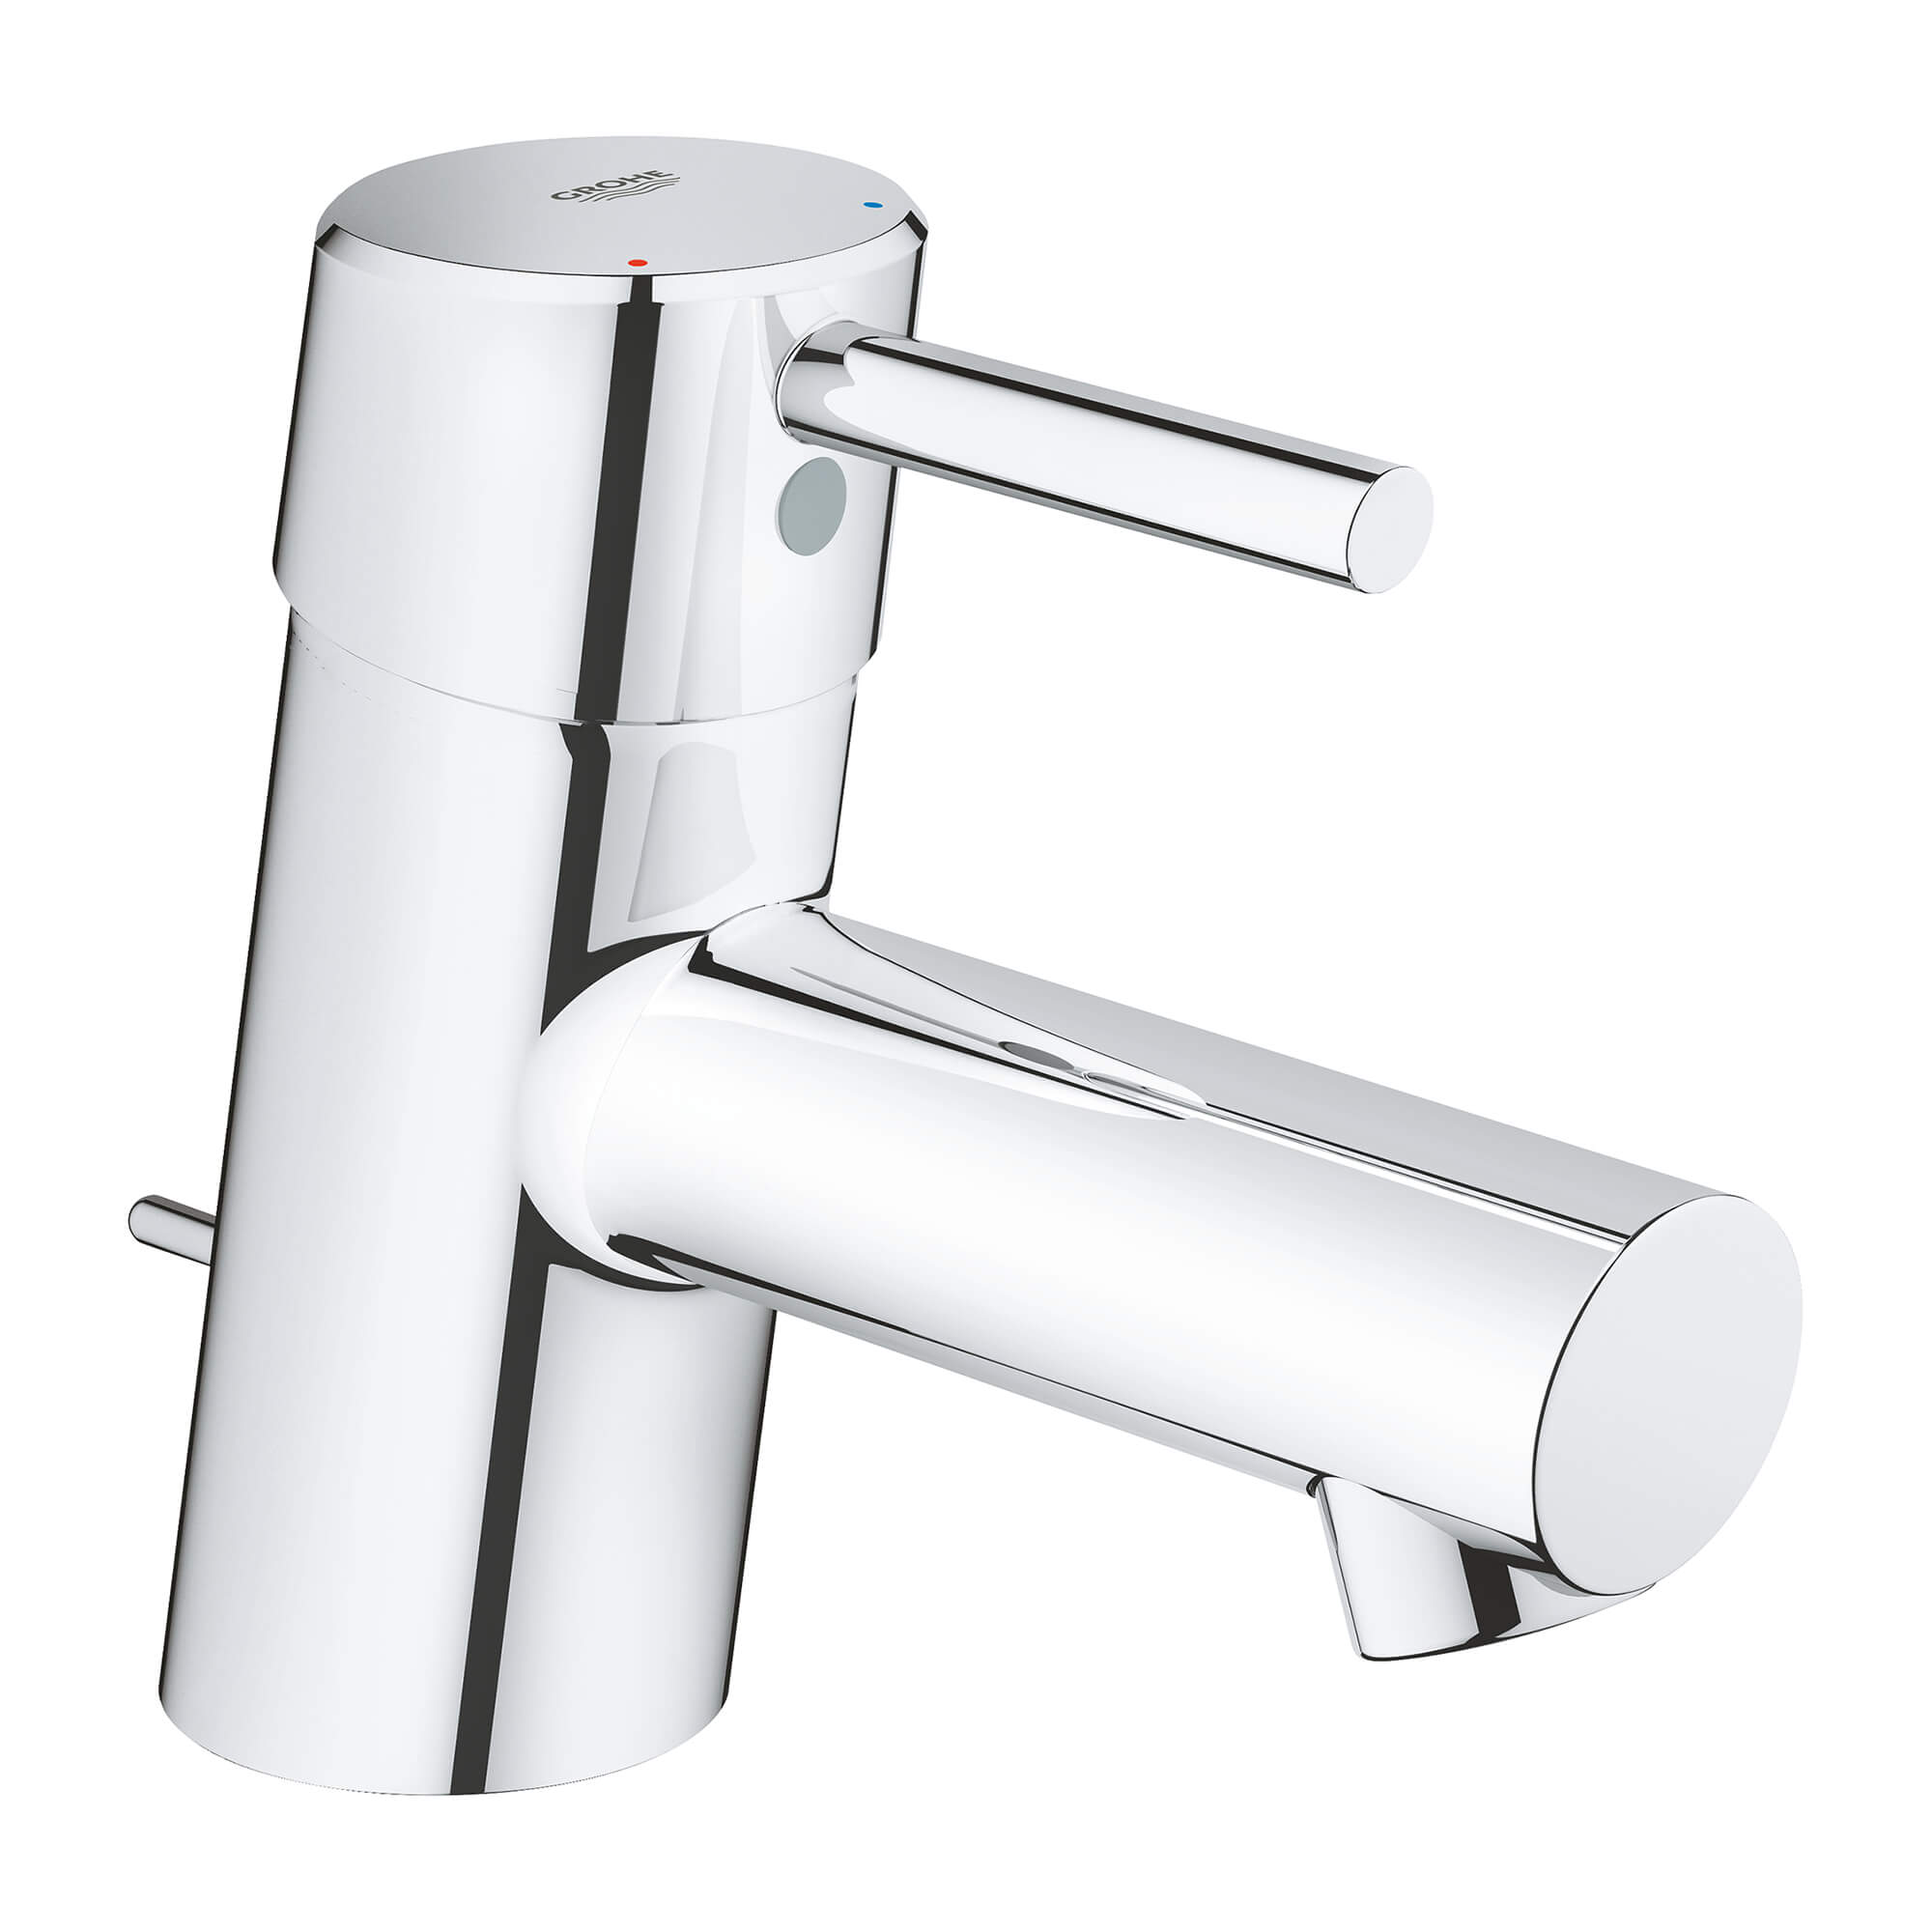 SINGLE HOLE SINGLE-HANDLE XS-SIZE BATHROOM FAUCET 1.2 GPM-related